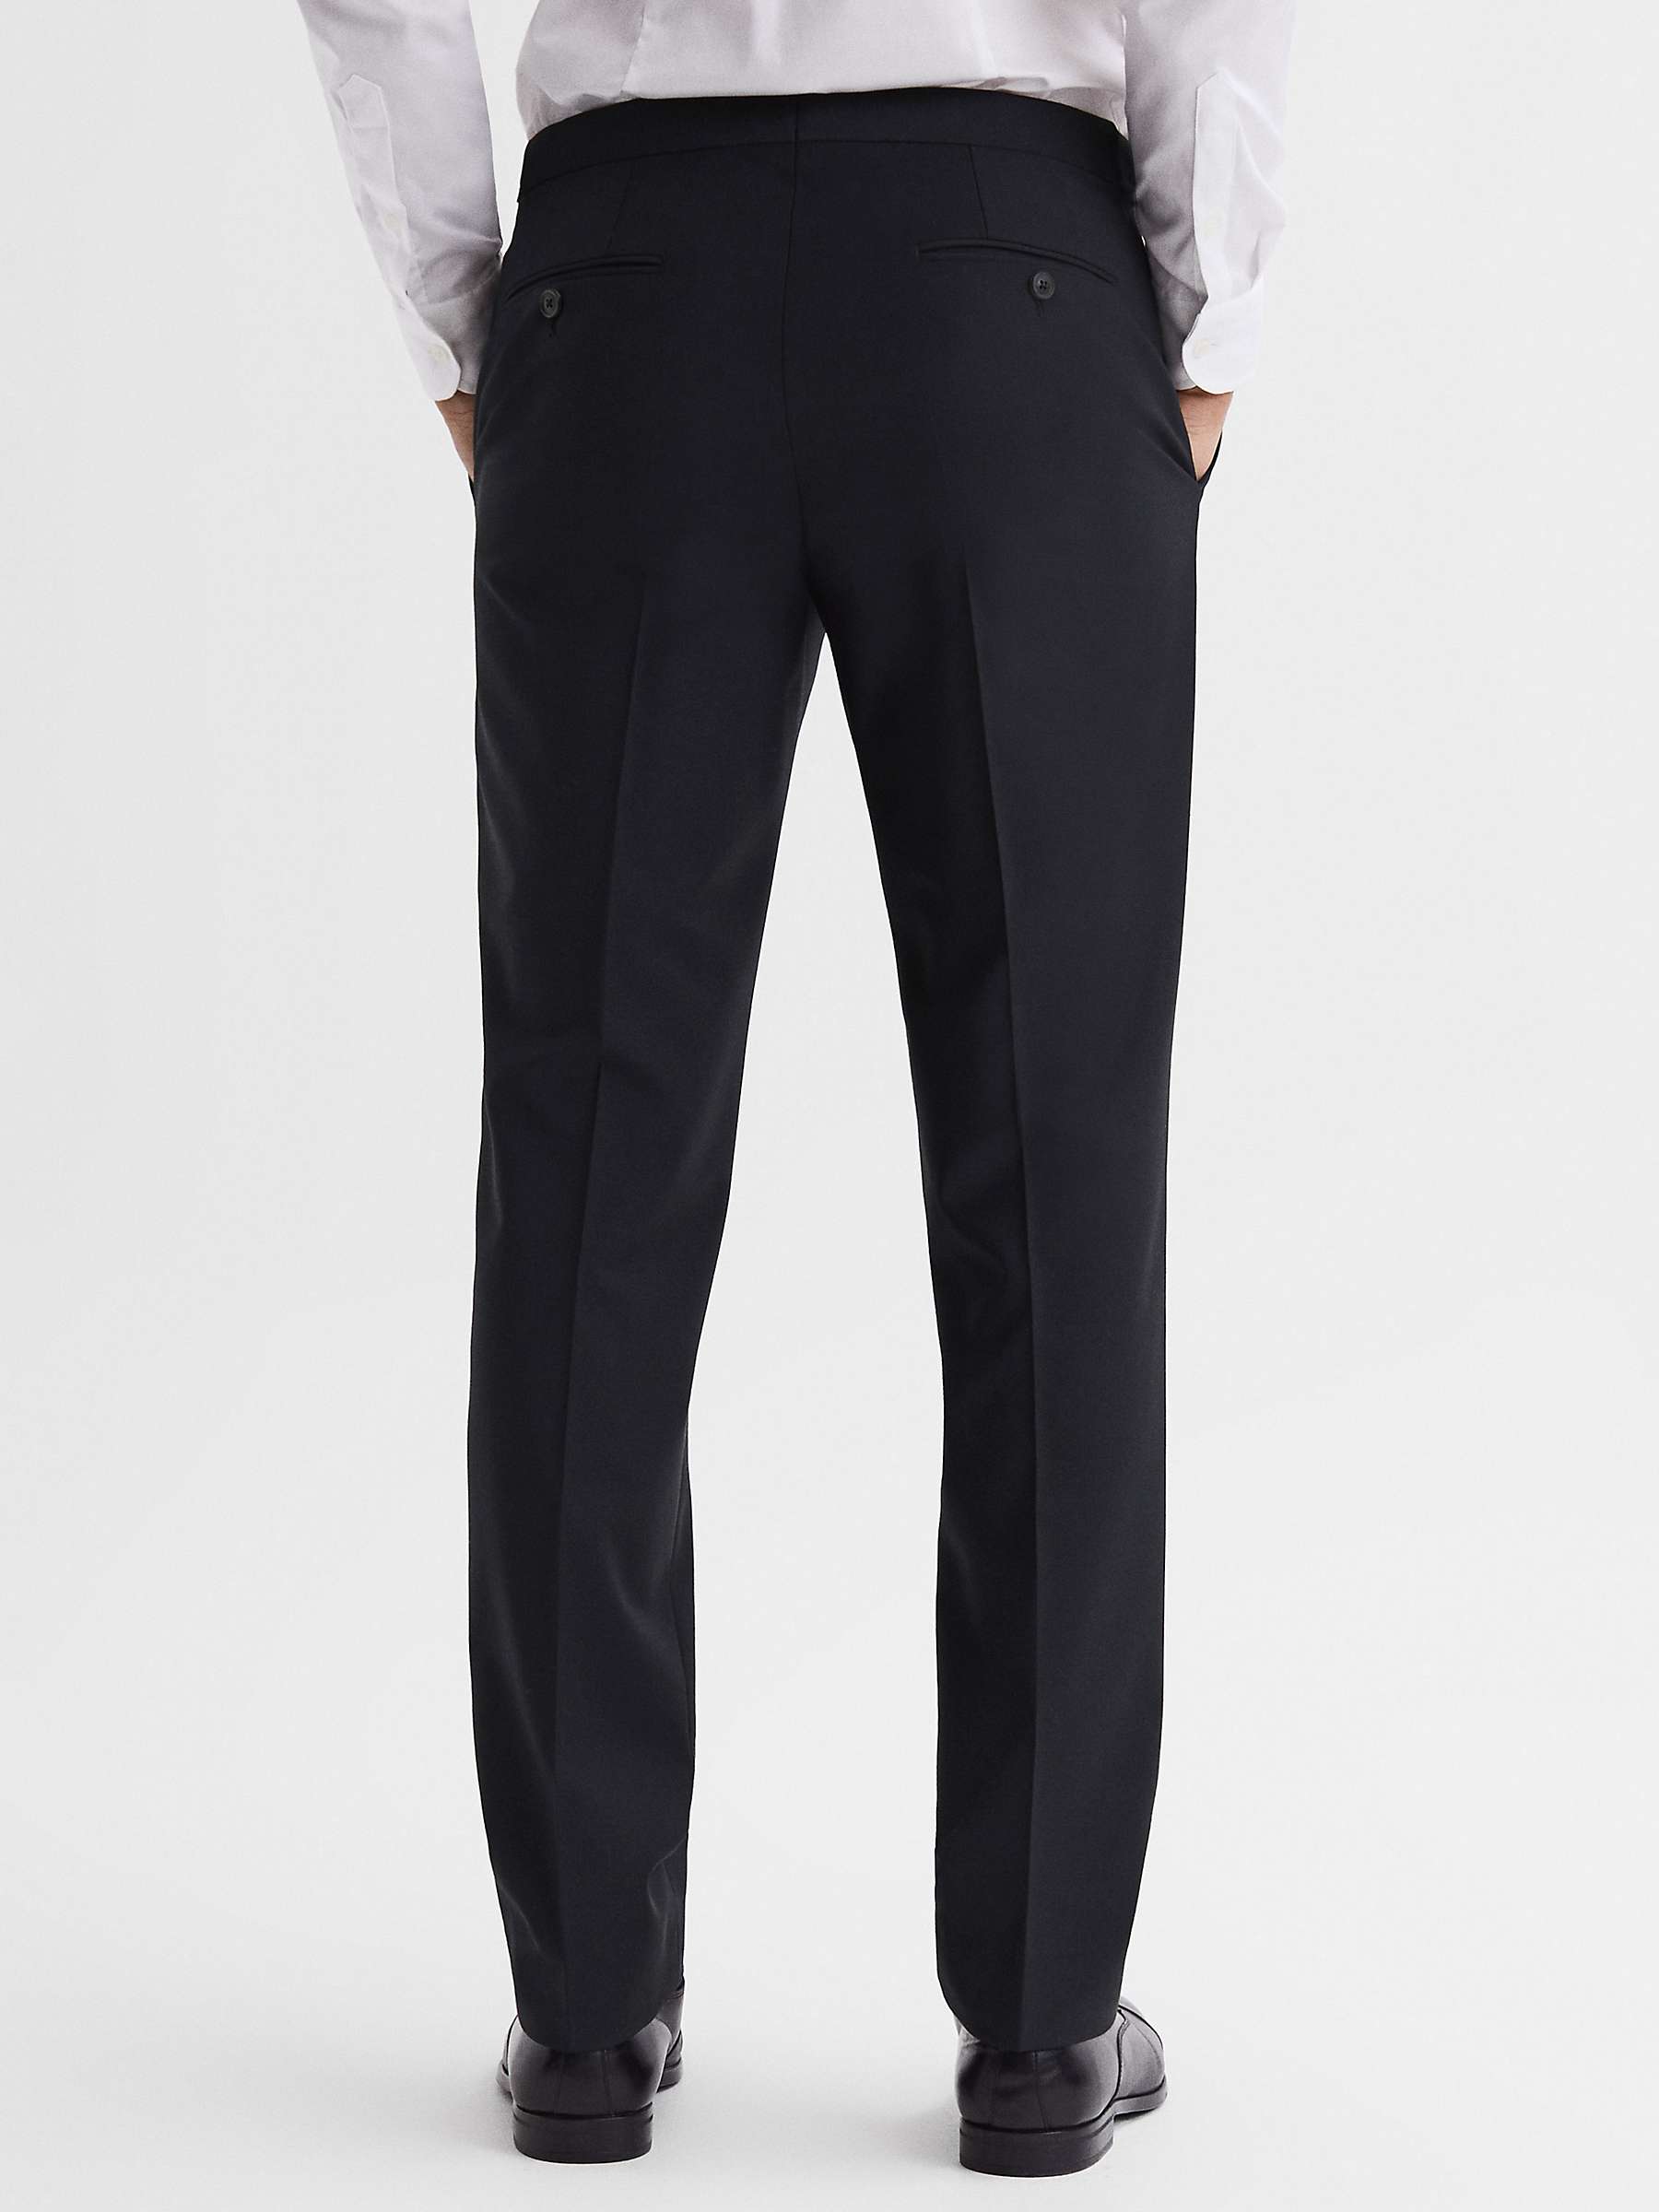 Buy Reiss Hope Modern Fit Wool Blend Travel Suit Trousers Online at johnlewis.com